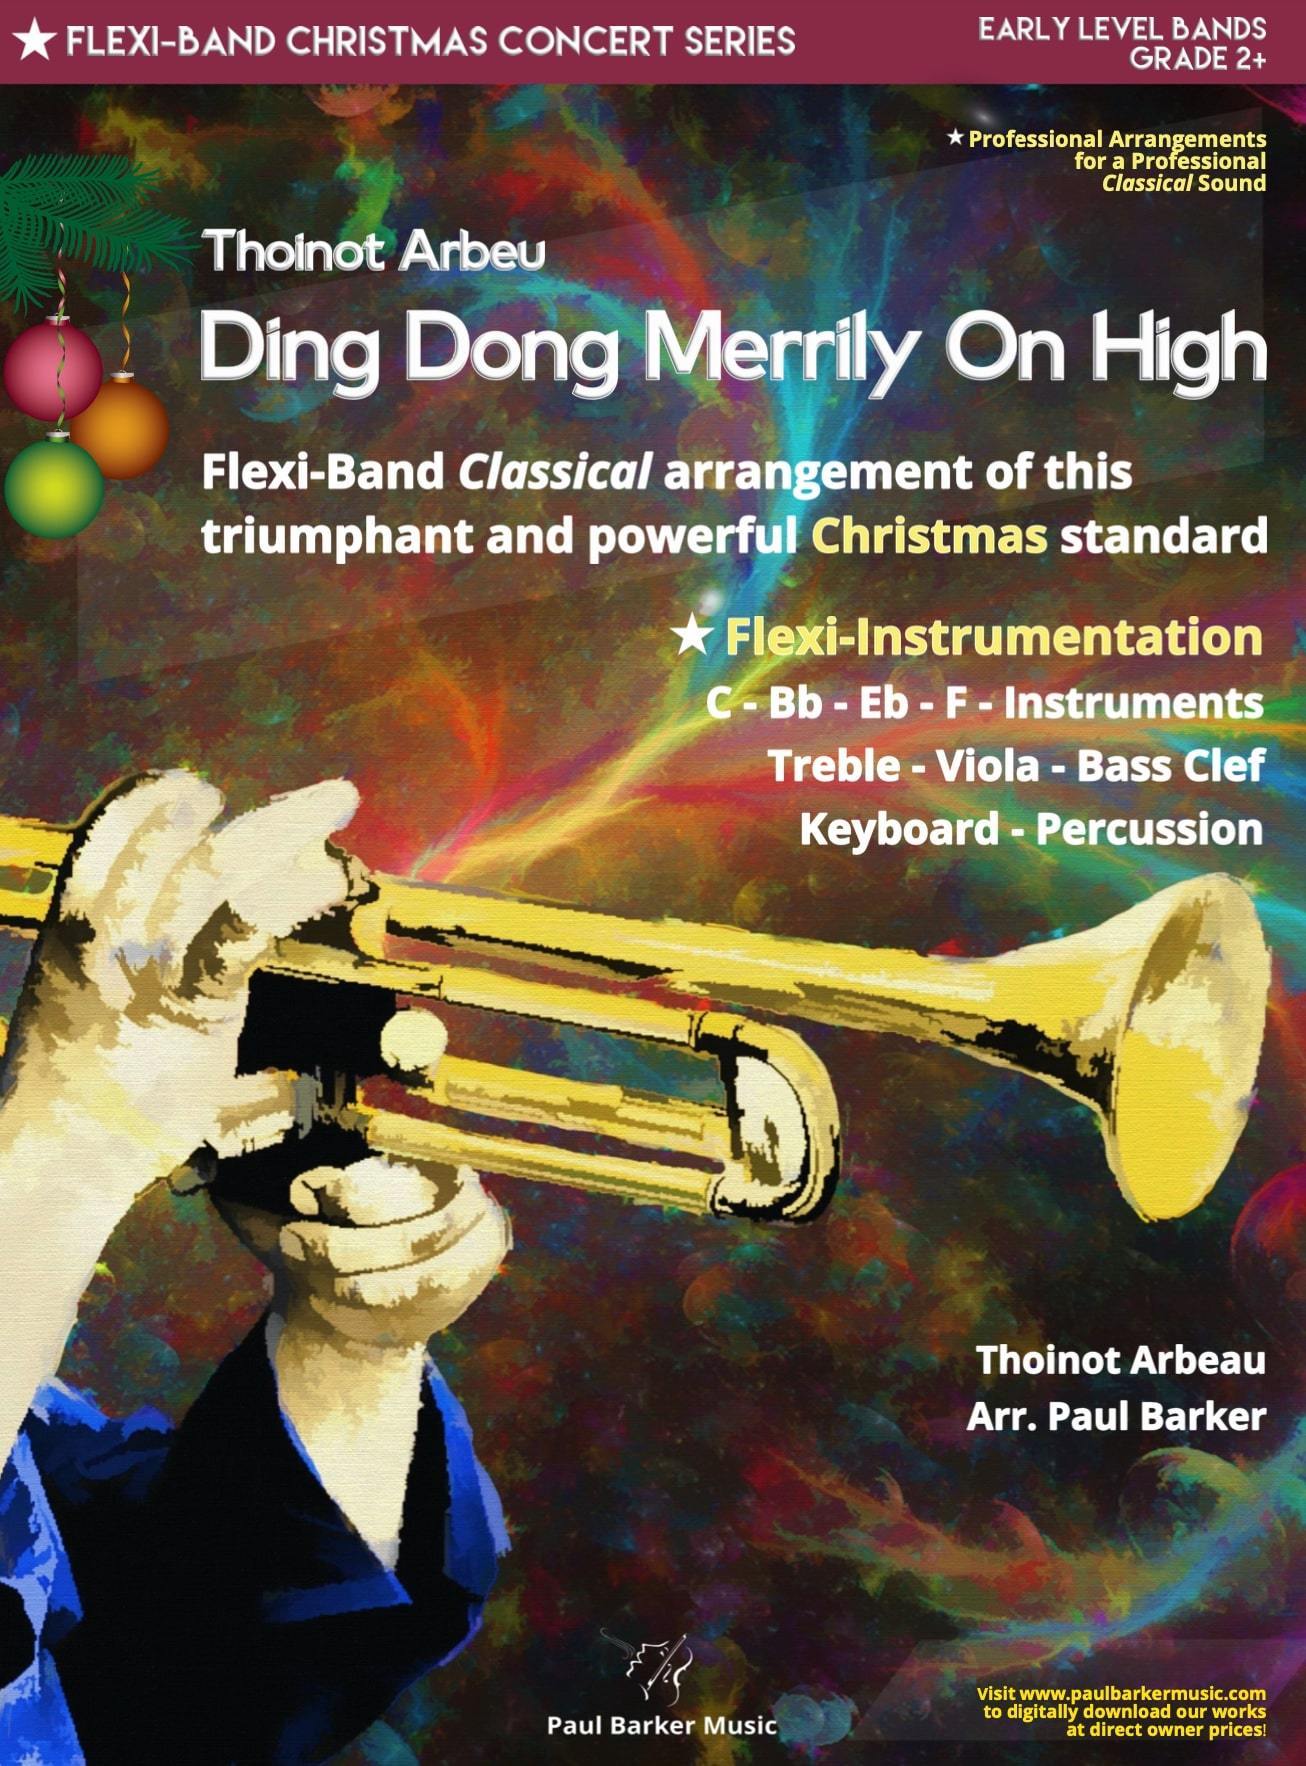 Ding Dong Merrily On High (Flexi-Band) - Paul Barker Music 